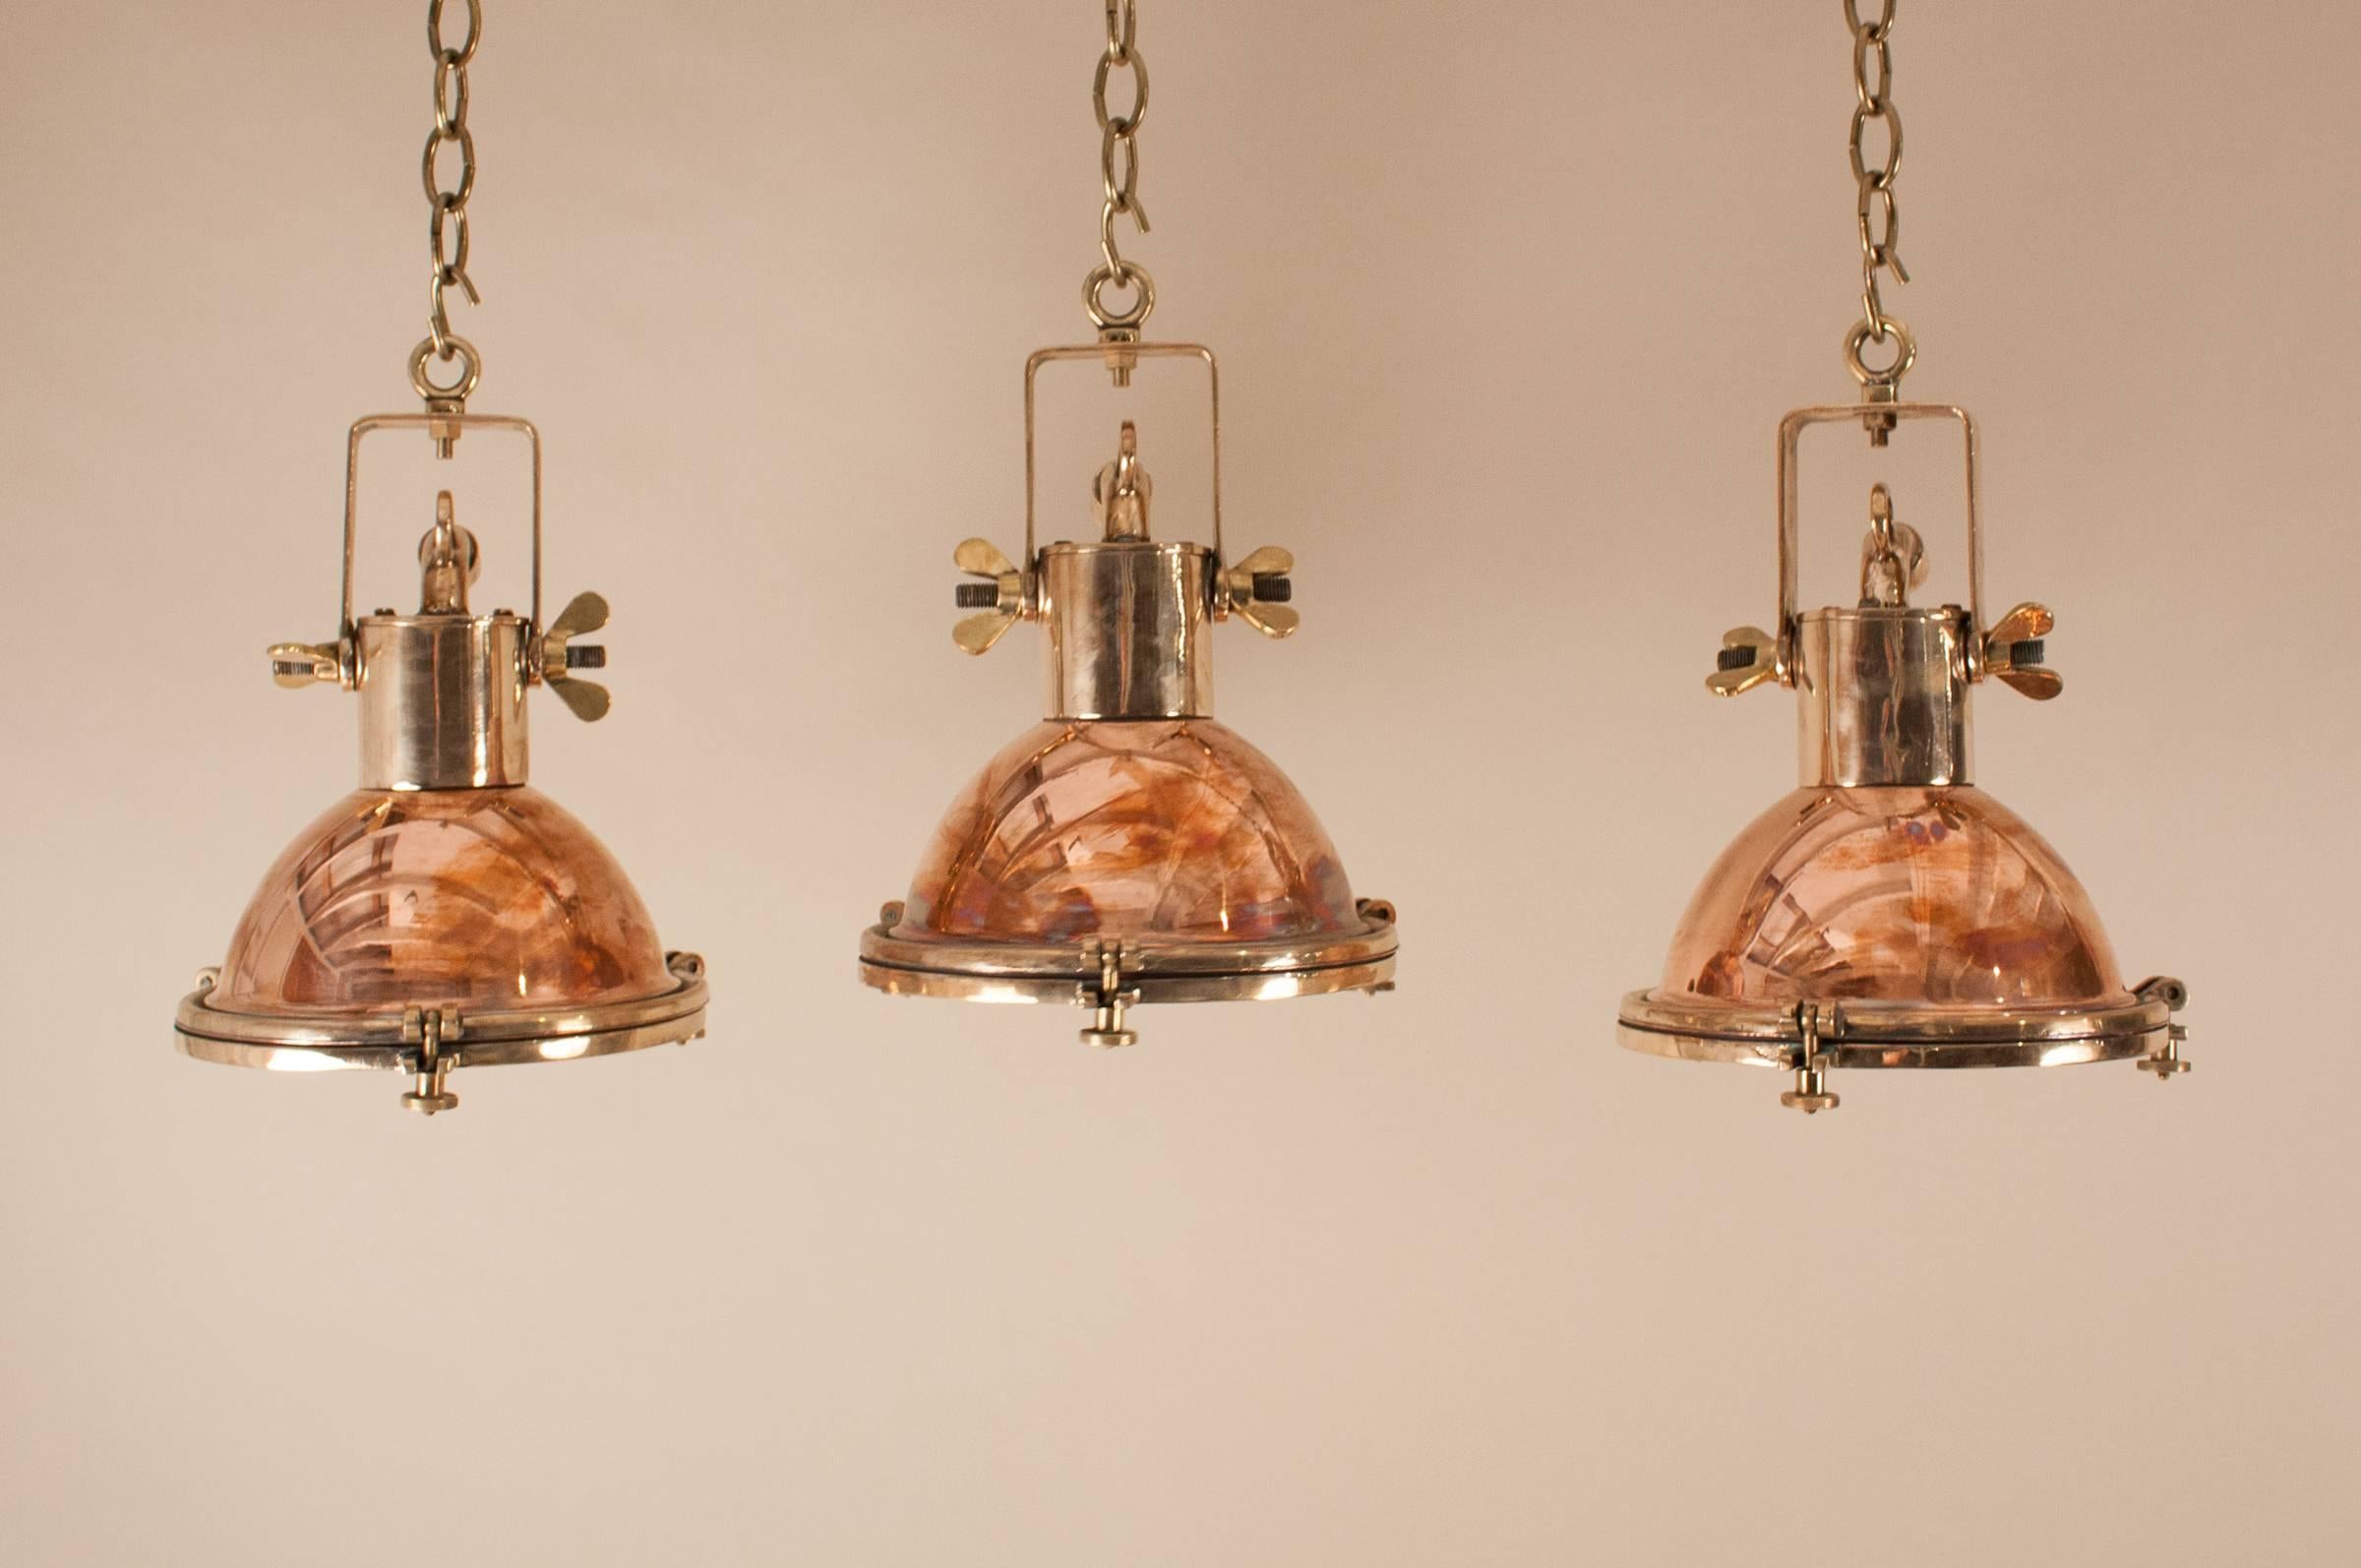 Industrial Set of Petite Copper and Brass Nautical Pendant Lights